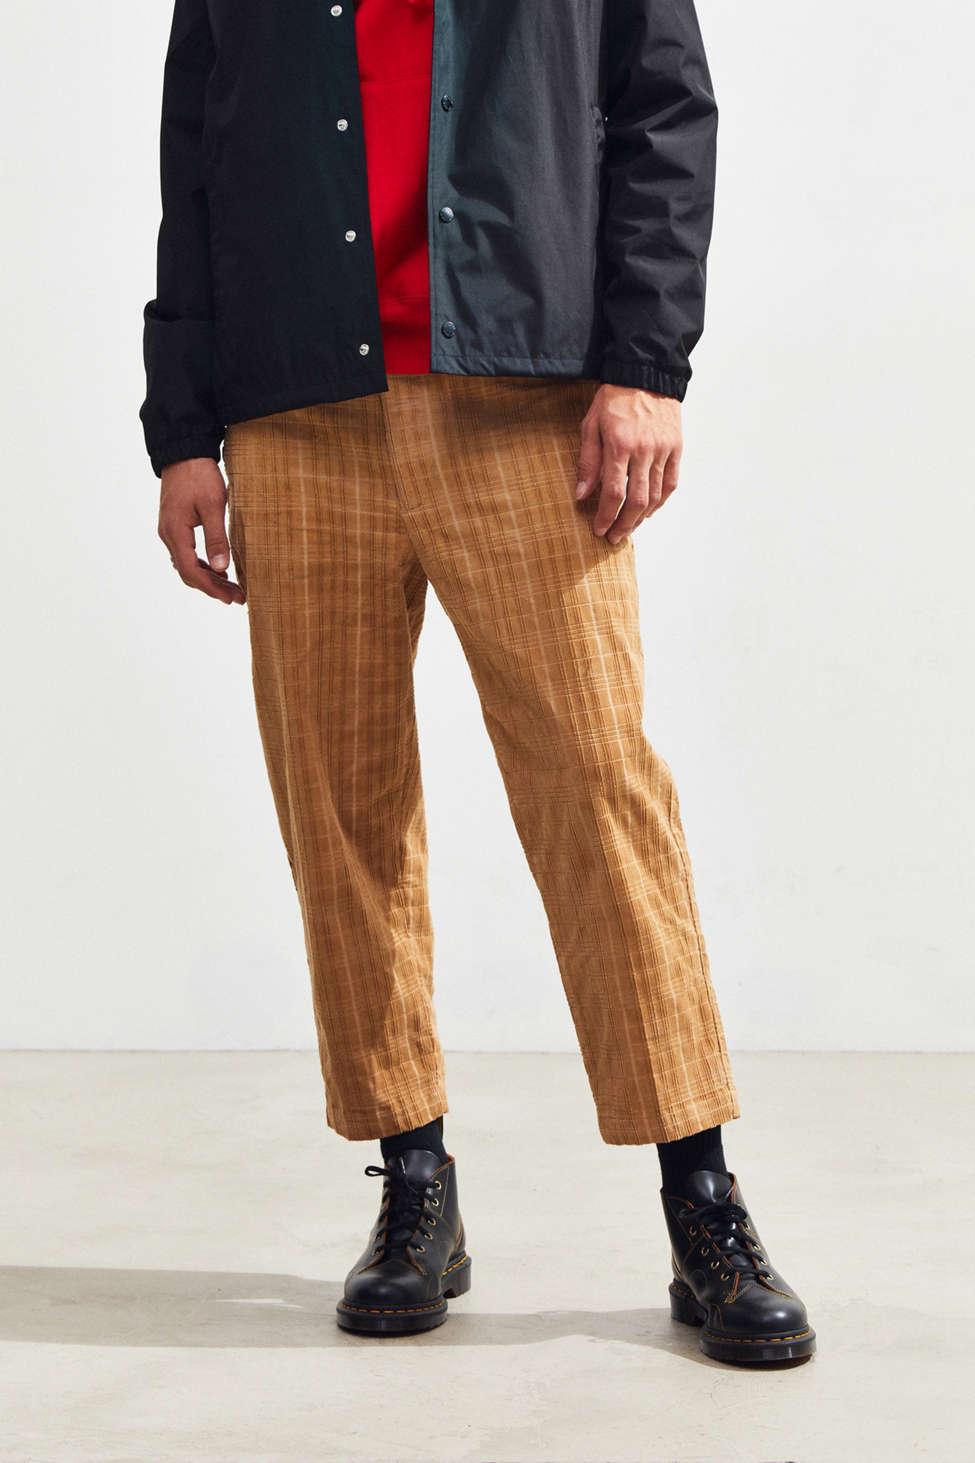 Urban Outfitters Uo Debossed Corduroy Skate Chino Pant for Men - Lyst